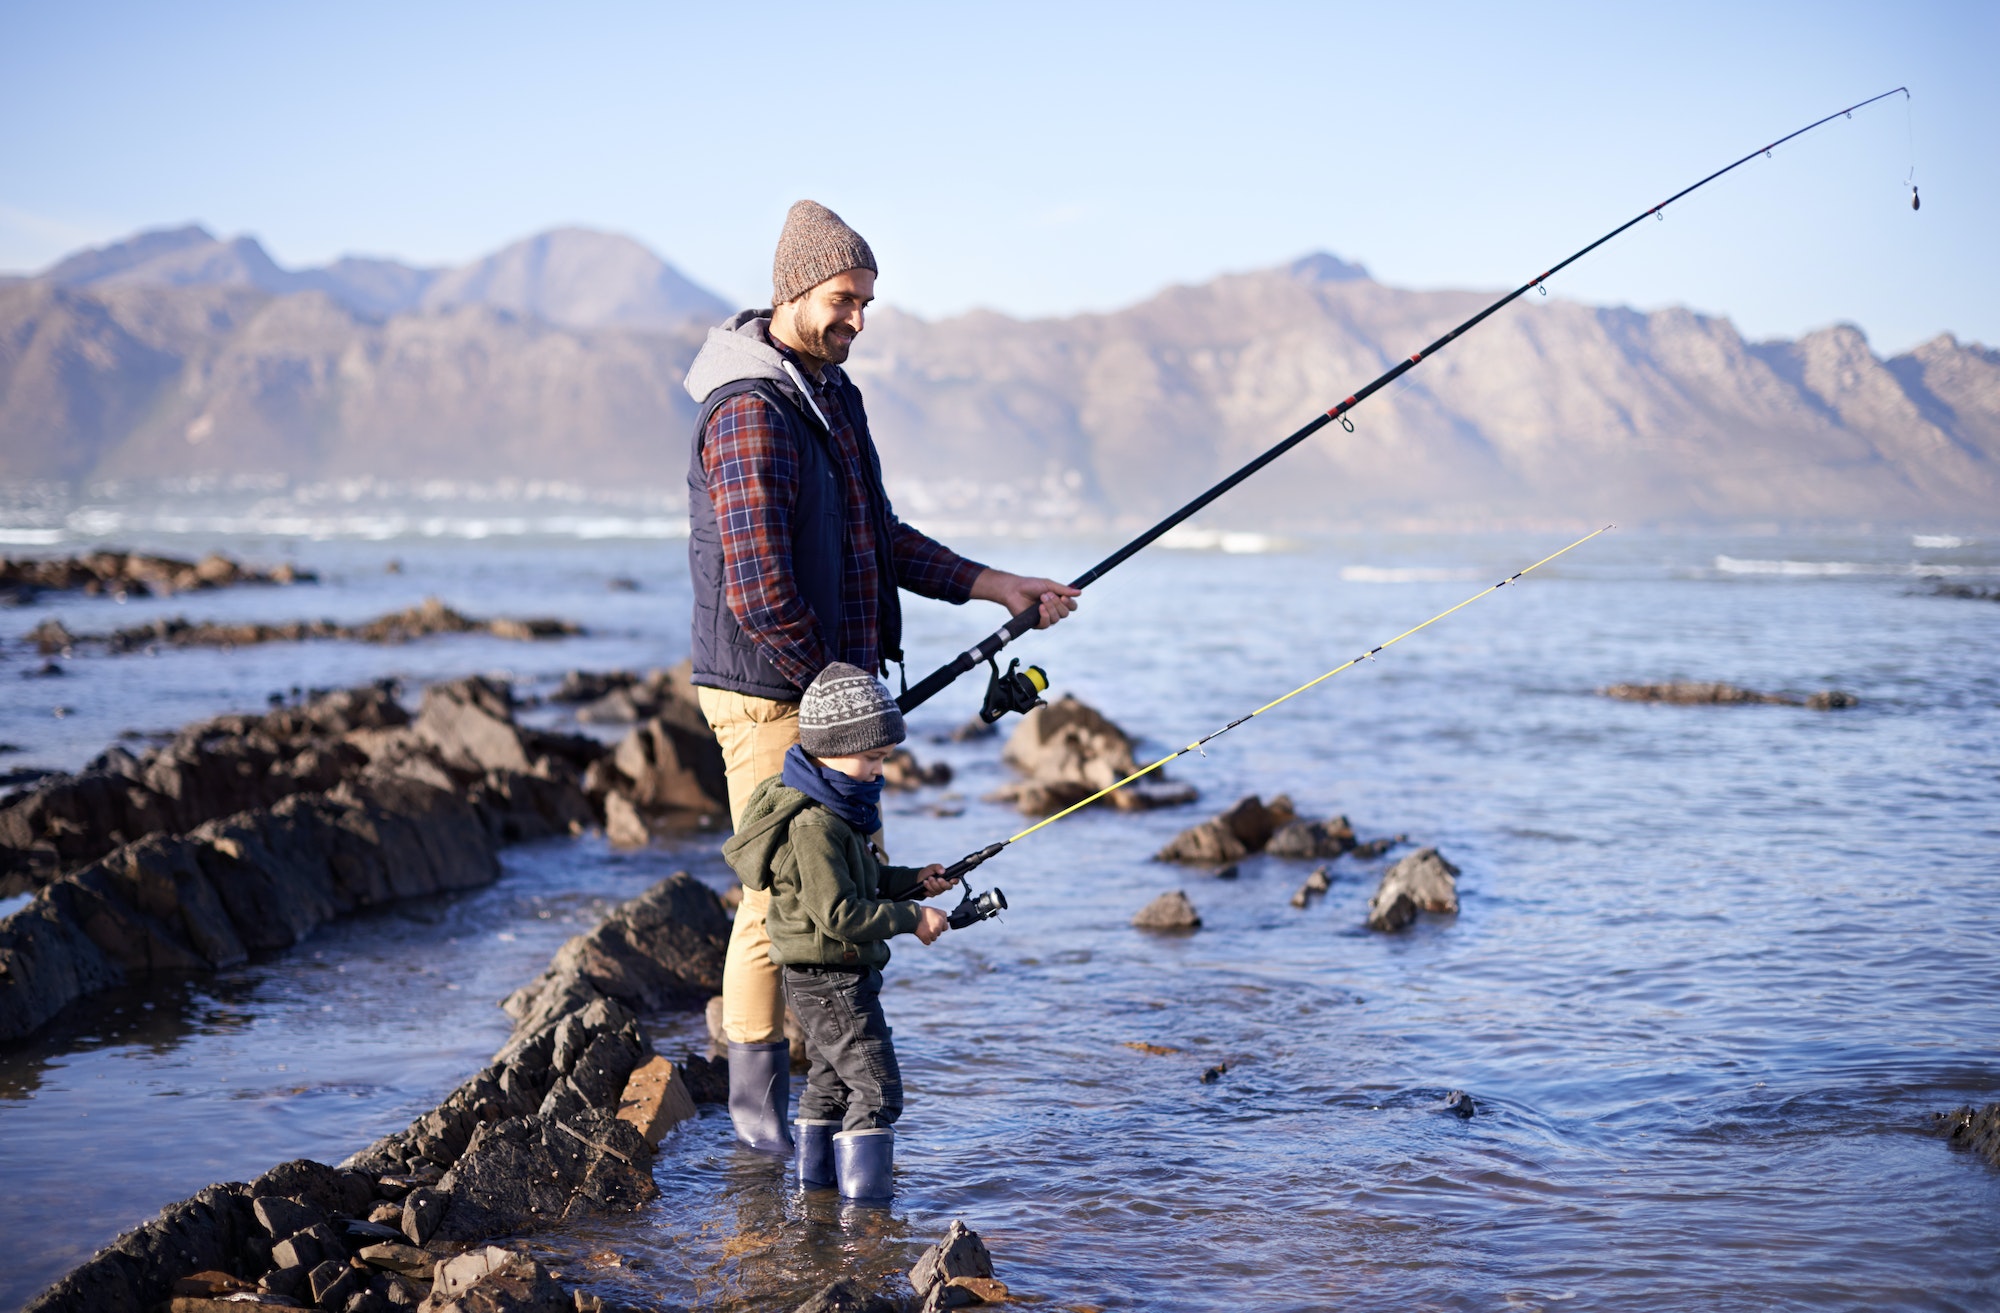 Looks like we have company. Shot of a cute little boy fishing with his father by the sea.